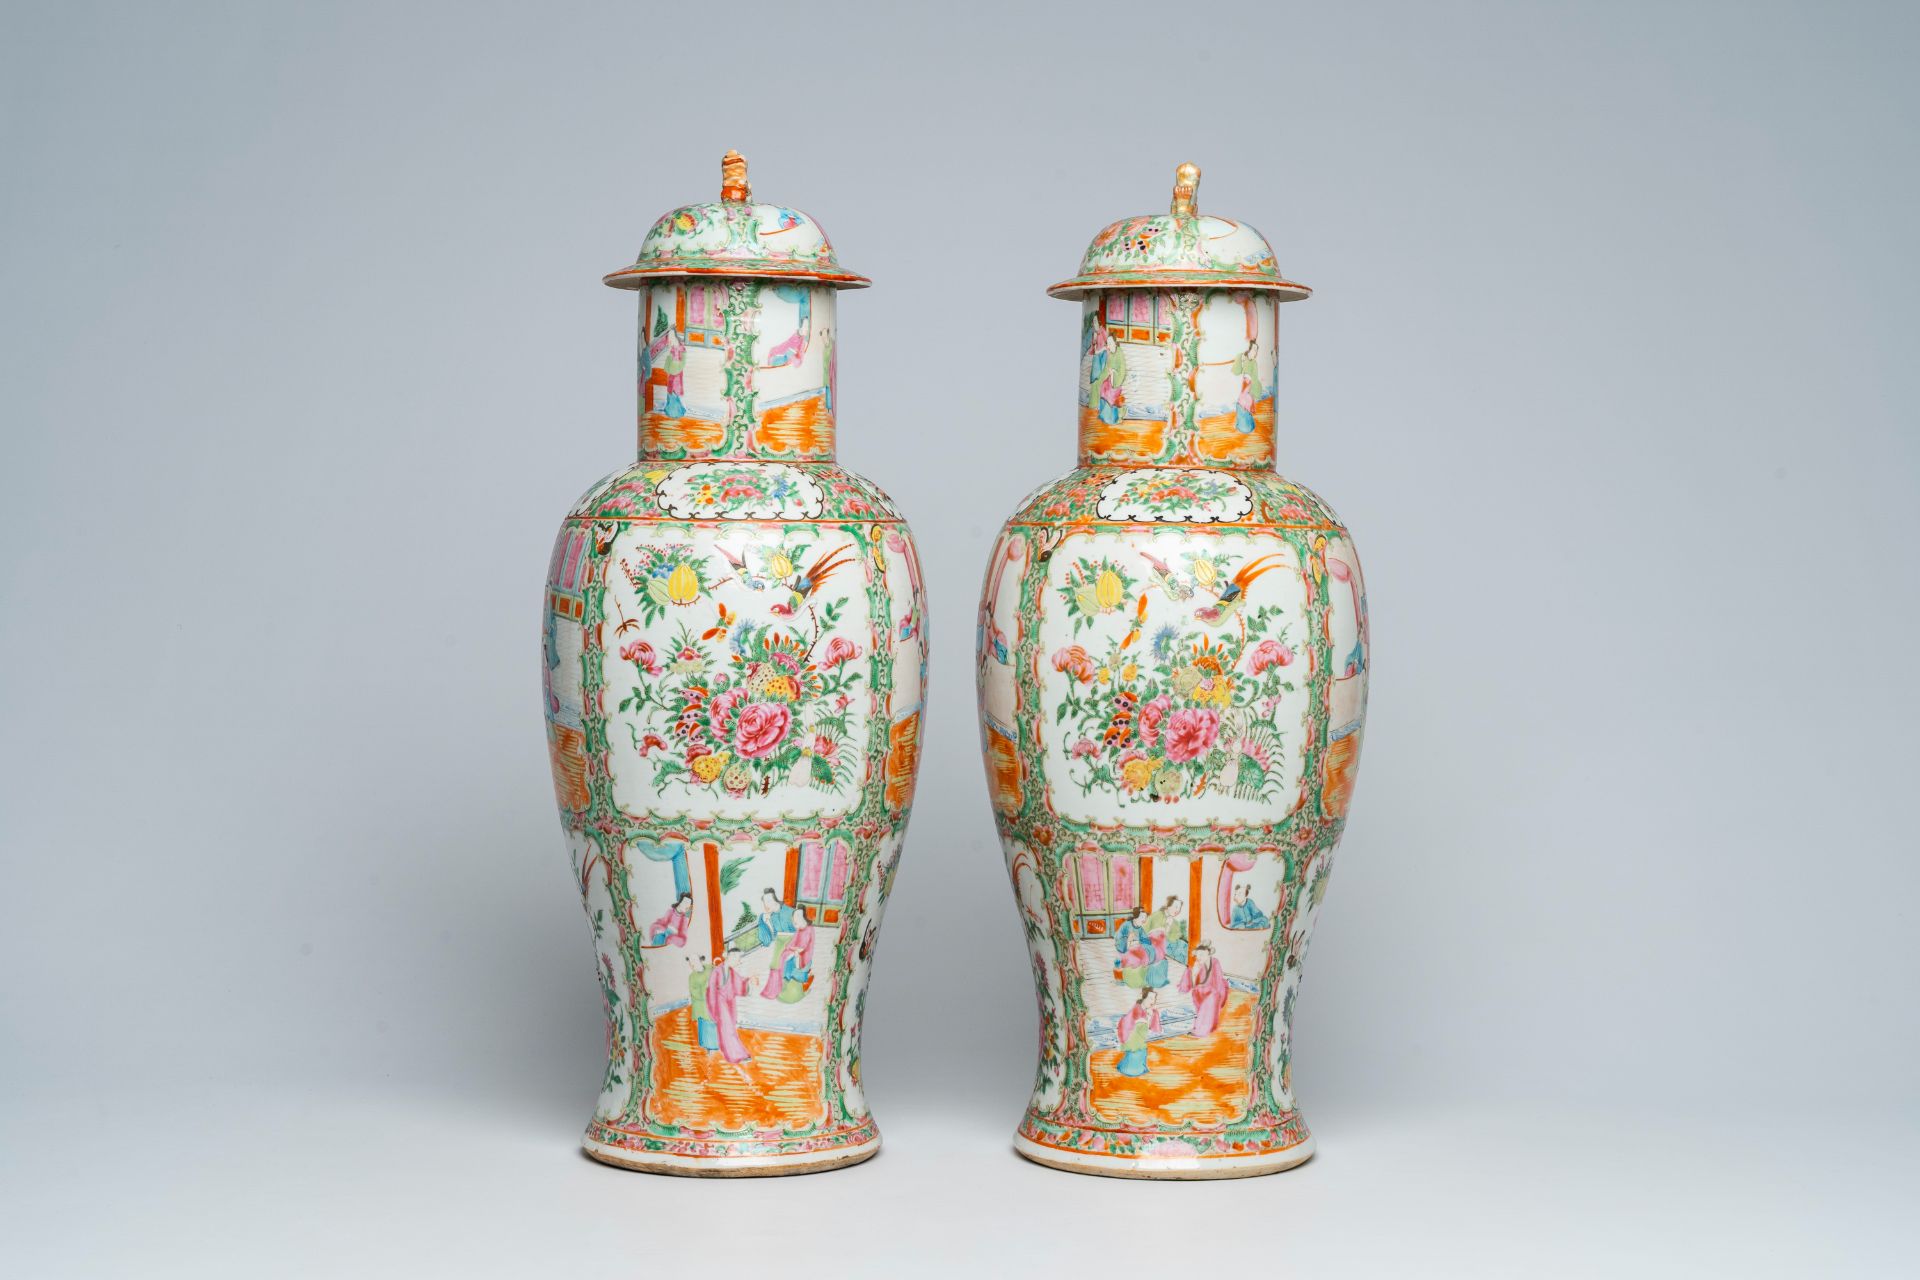 A pair of Chinese Canton famille rose vases and covers with palace scenes and floral design, 19th C. - Image 4 of 6